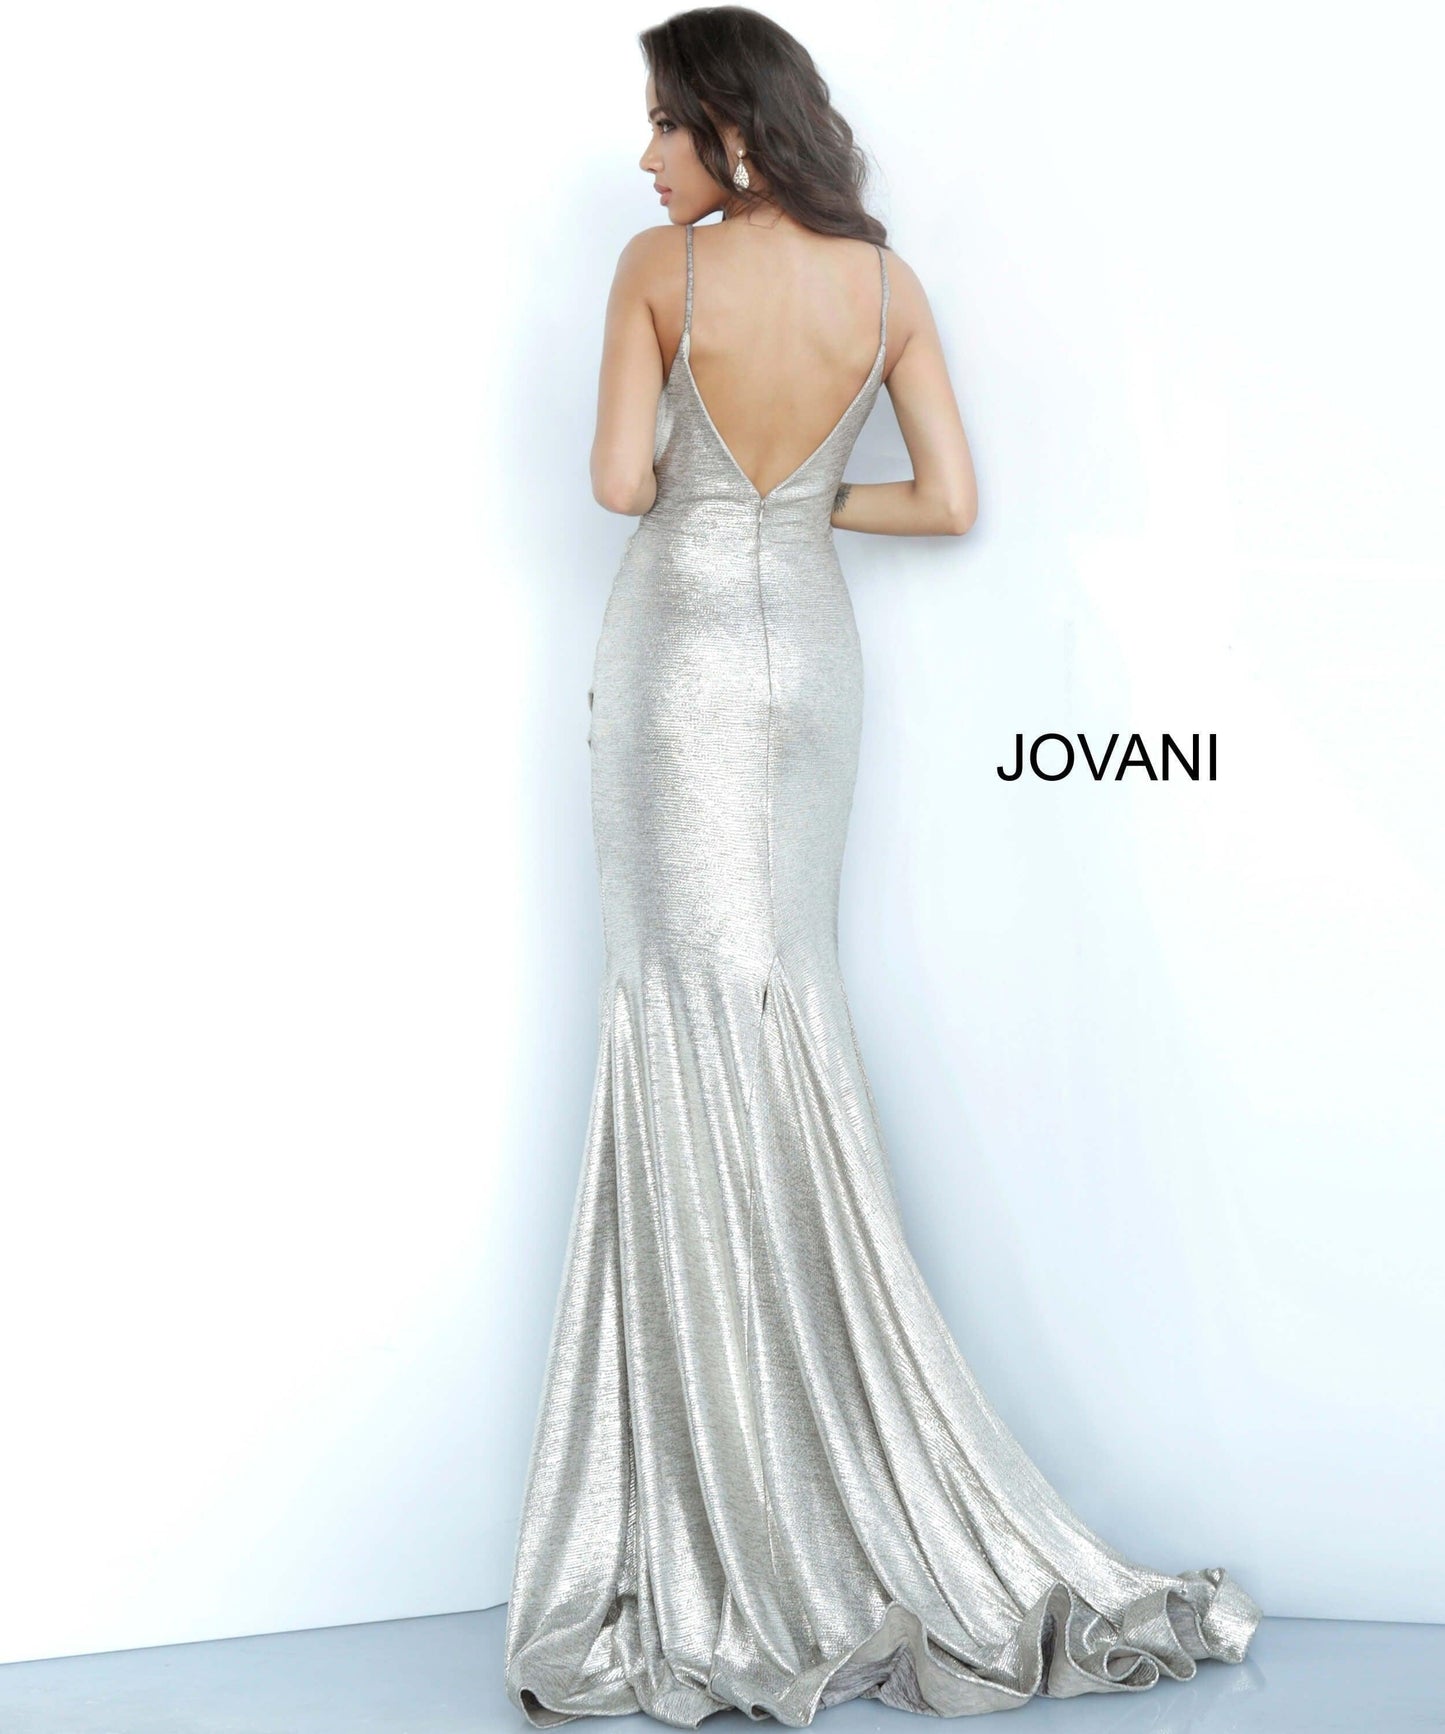 Jovani Metallic Shimmer Long Fitted Prom Dress 67977 - The Dress Outlet